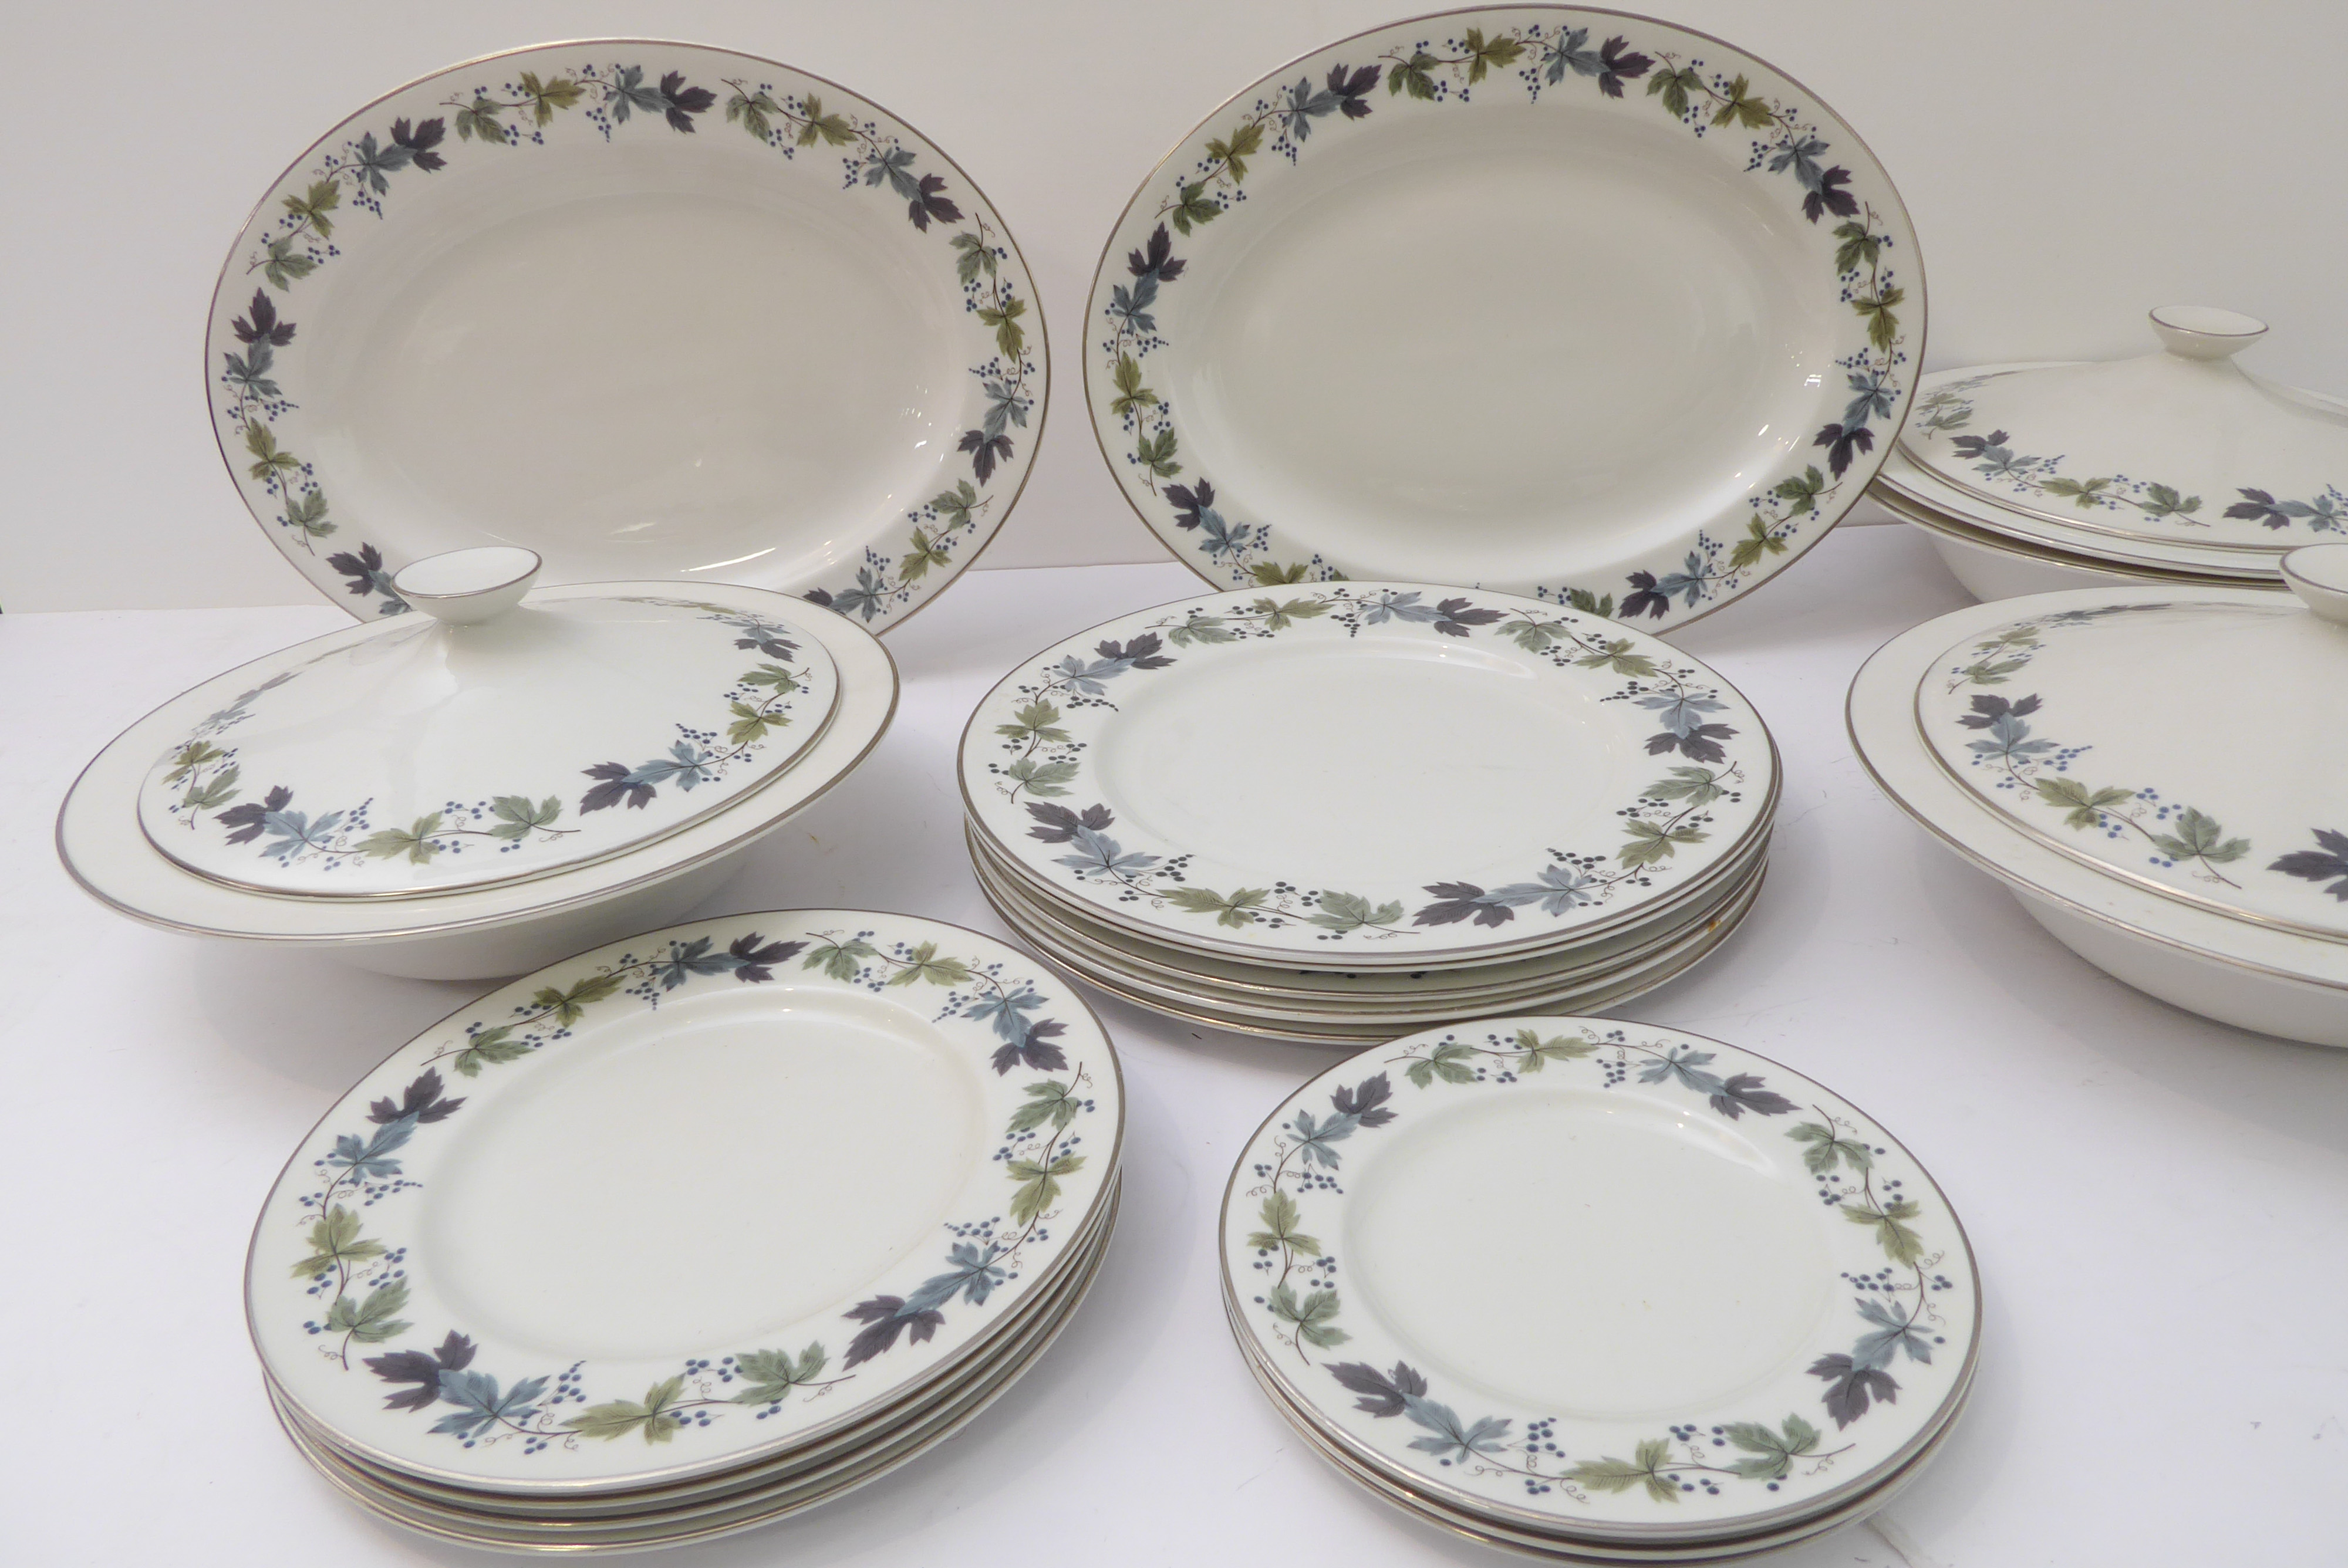 A Royal Doulton fine bone china part dinner service in the Burgundy pattern (T. C. 1001). The pieces